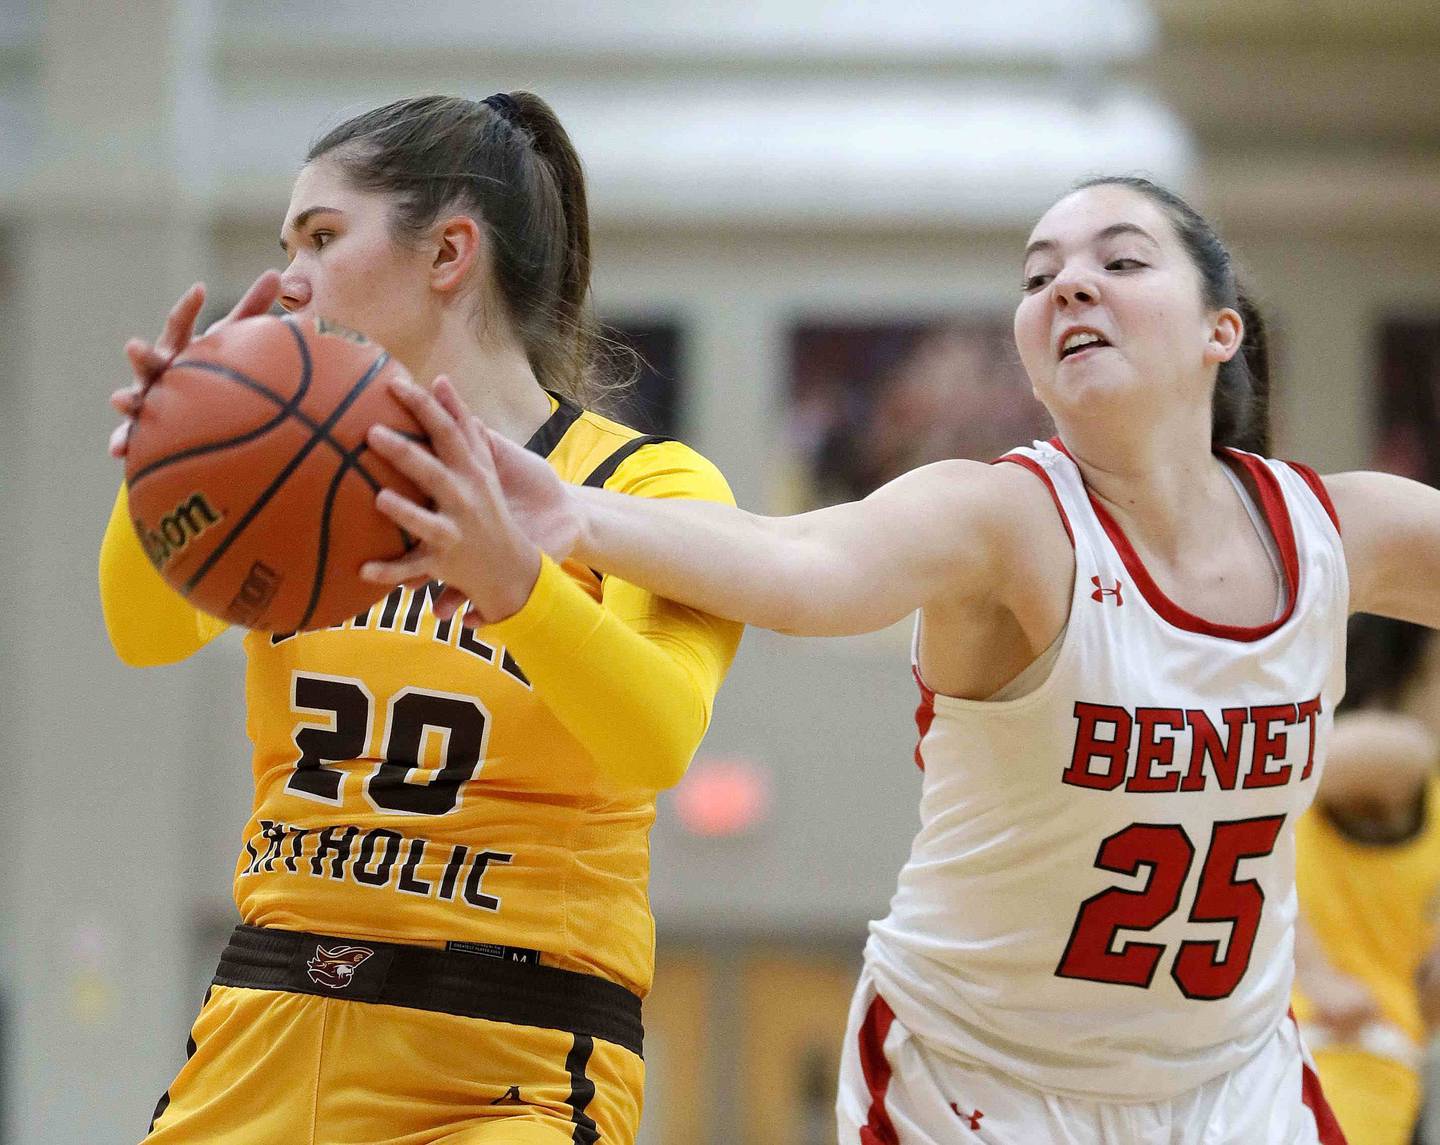 Brian Hill/bhill@dailyherald.com
Benet’s Samantha Trimberger (25) reaches for a rebound as Carmel's Mia Gillis (20) looks for an outlet Friday November 25, 2022 in Lisle.